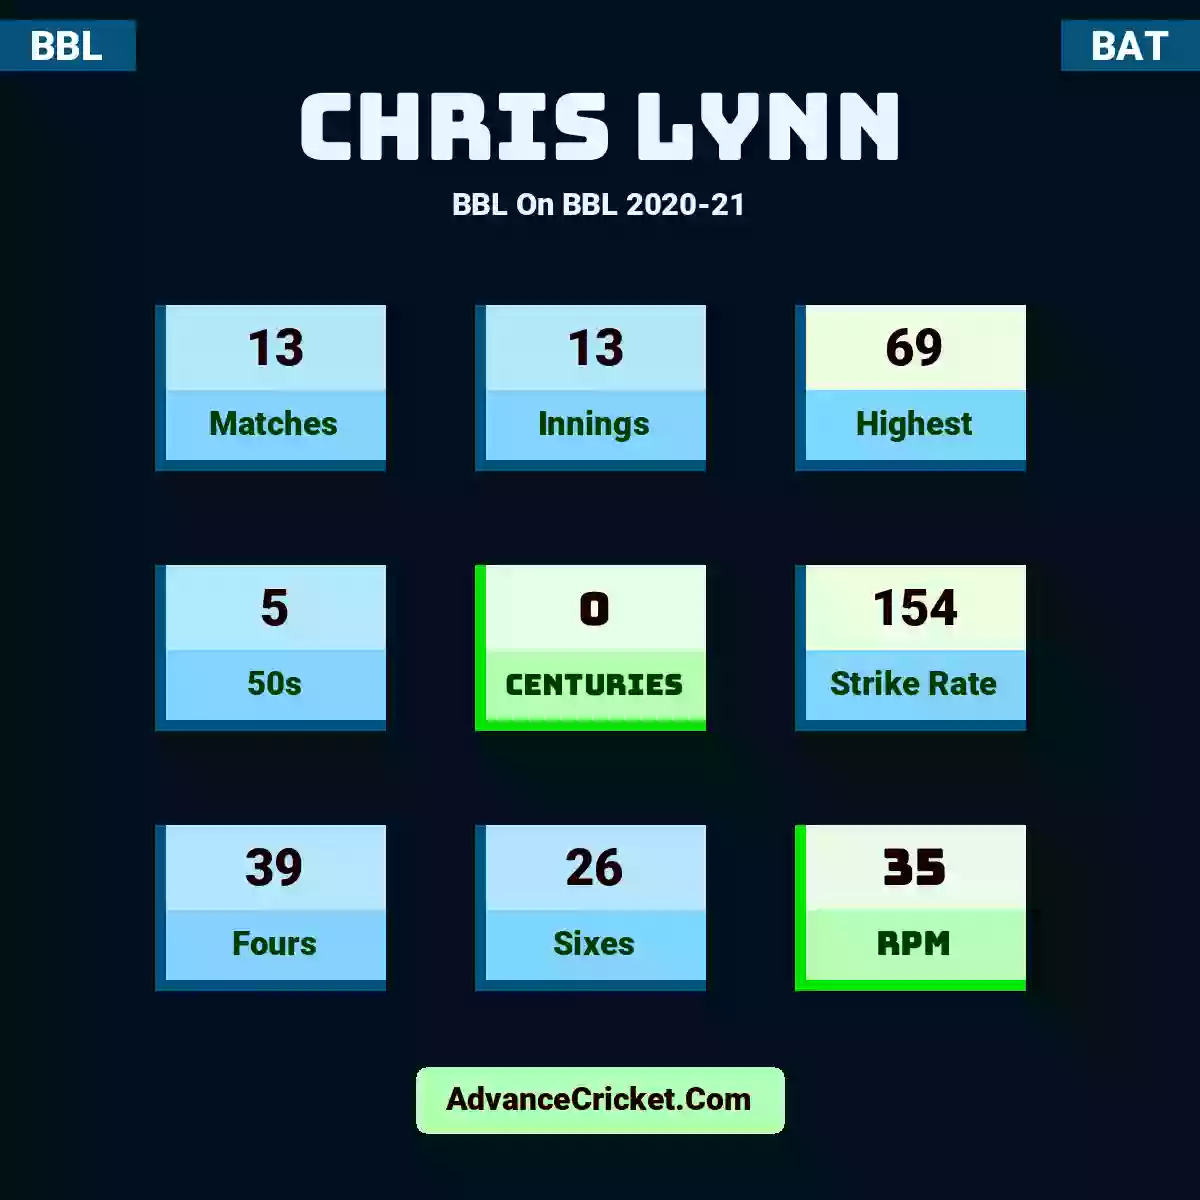 Chris Lynn BBL  On BBL 2020-21, Chris Lynn played 13 matches, scored 69 runs as highest, 5 half-centuries, and 0 centuries, with a strike rate of 154. C.Lynn hit 39 fours and 26 sixes, with an RPM of 35.